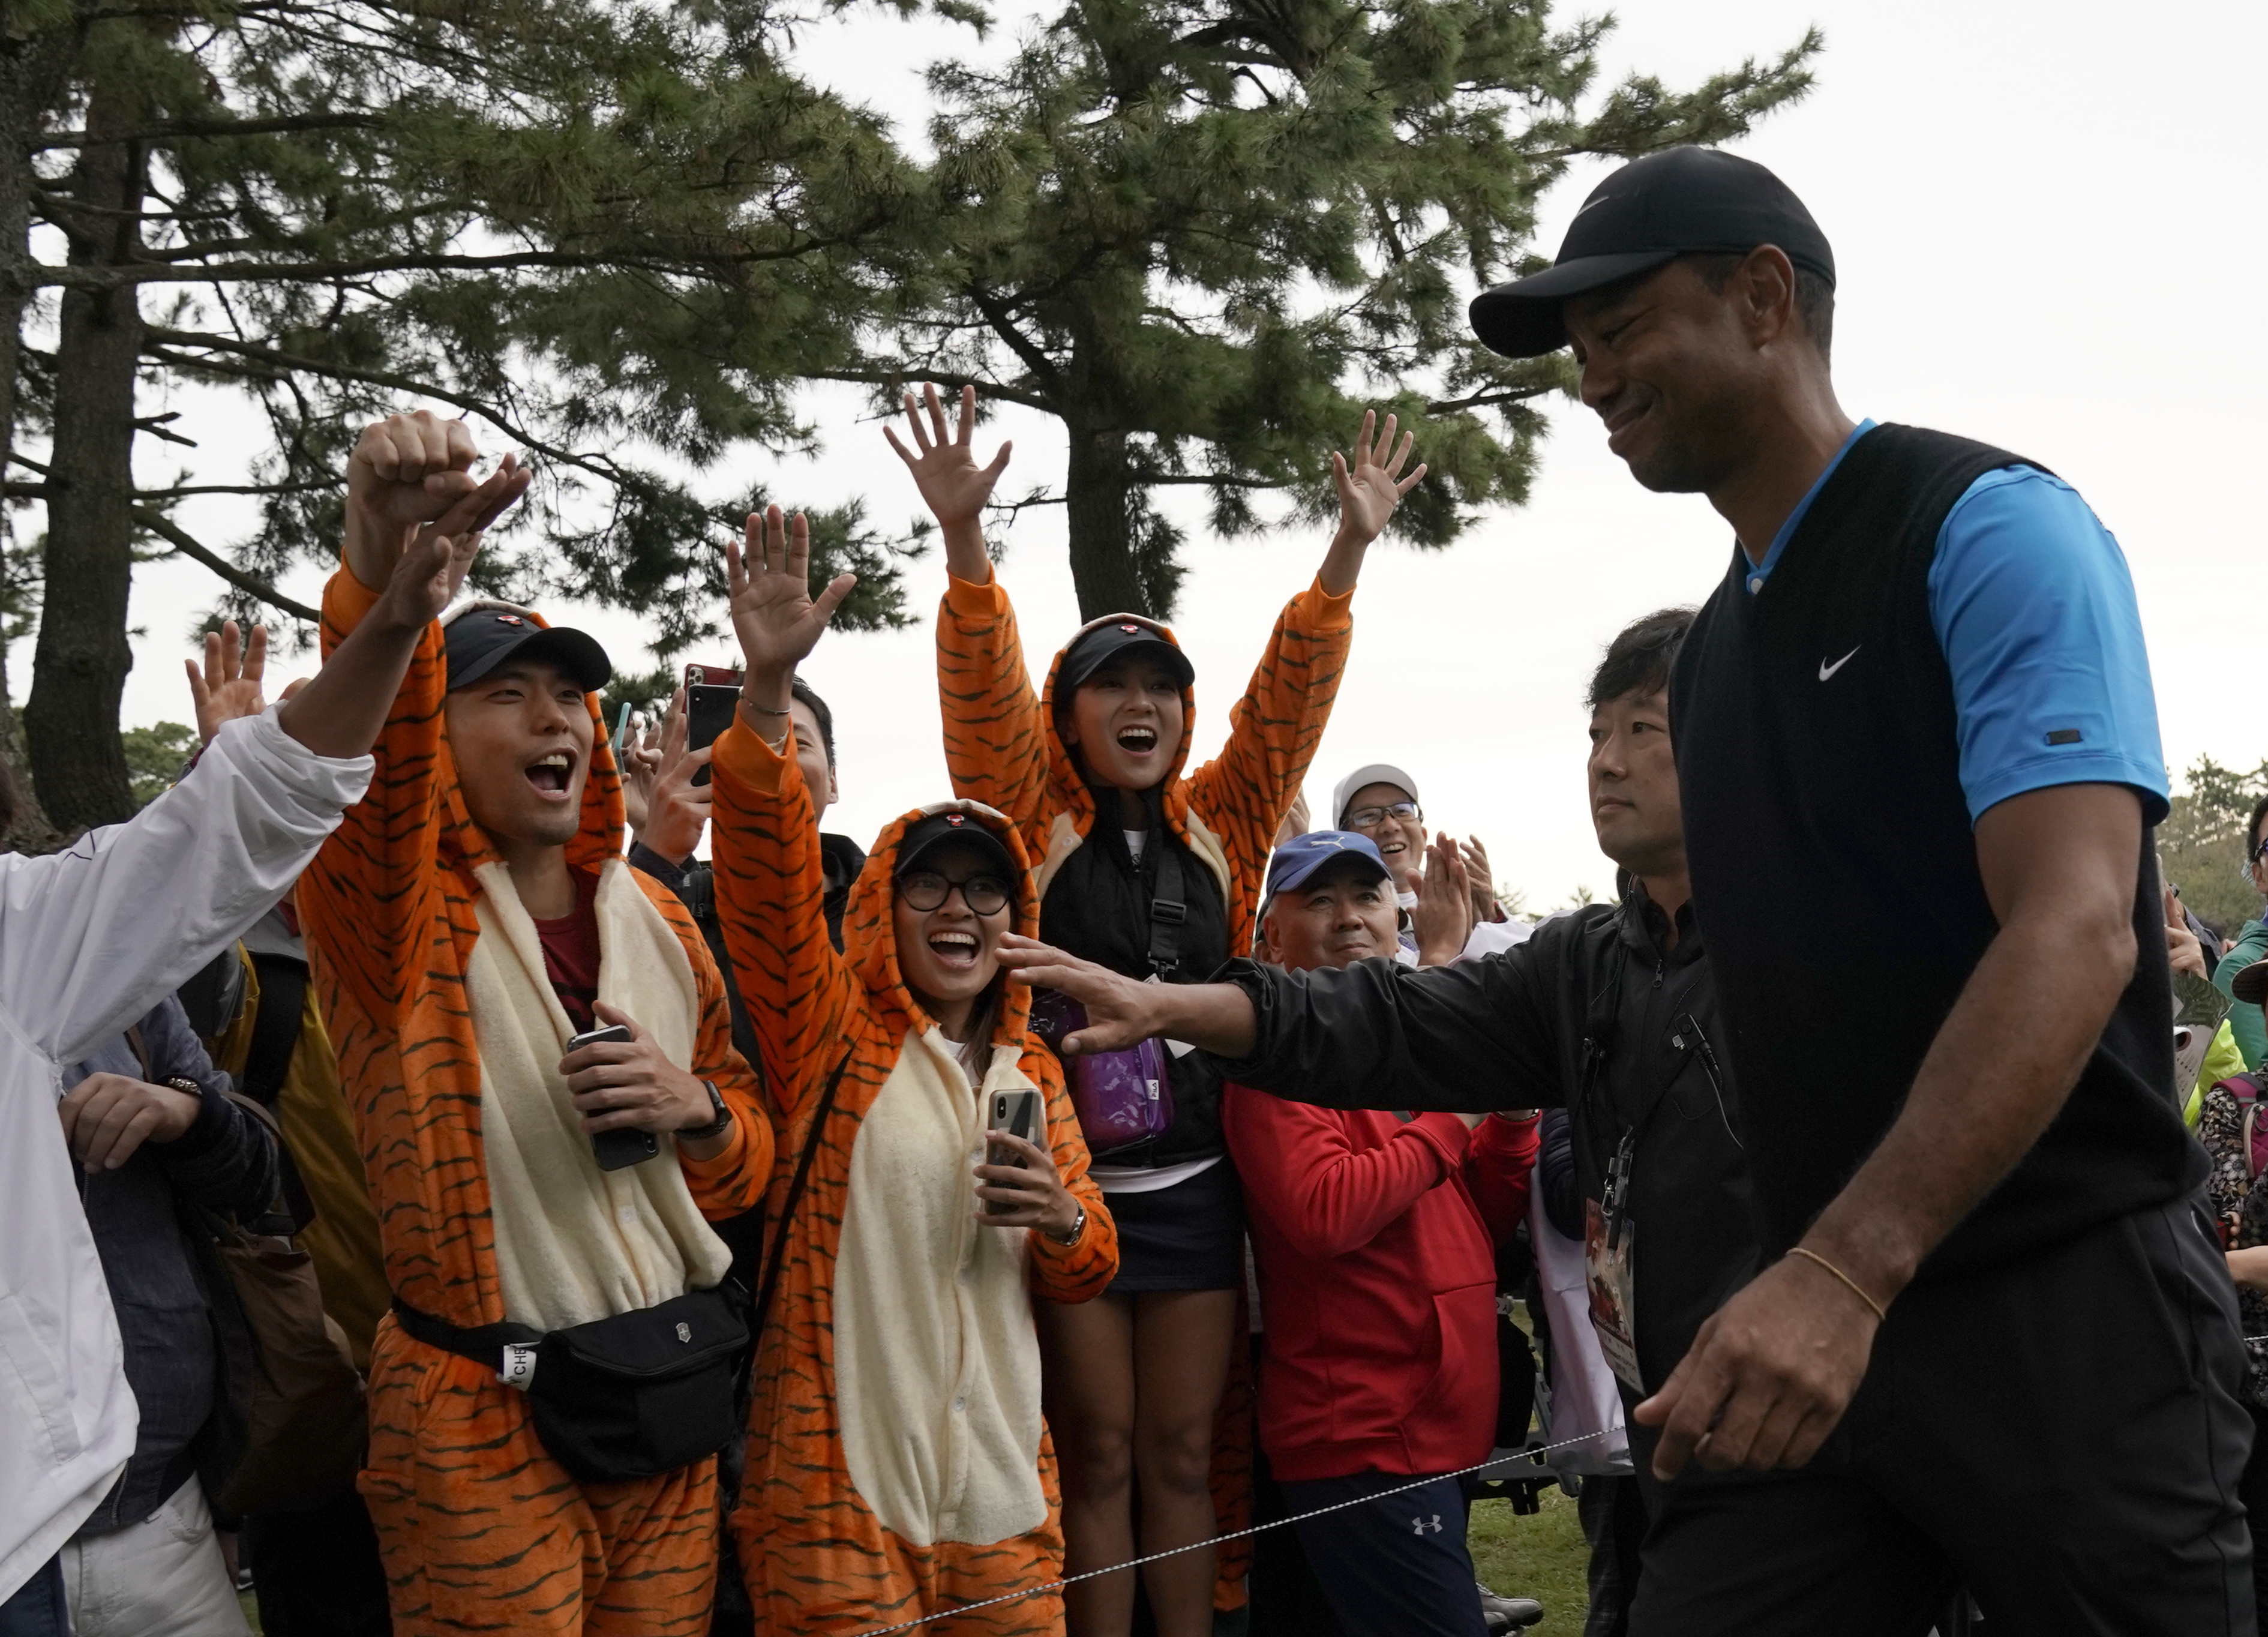 Tiger Woods 3-strokes ahead at Zozo Championship